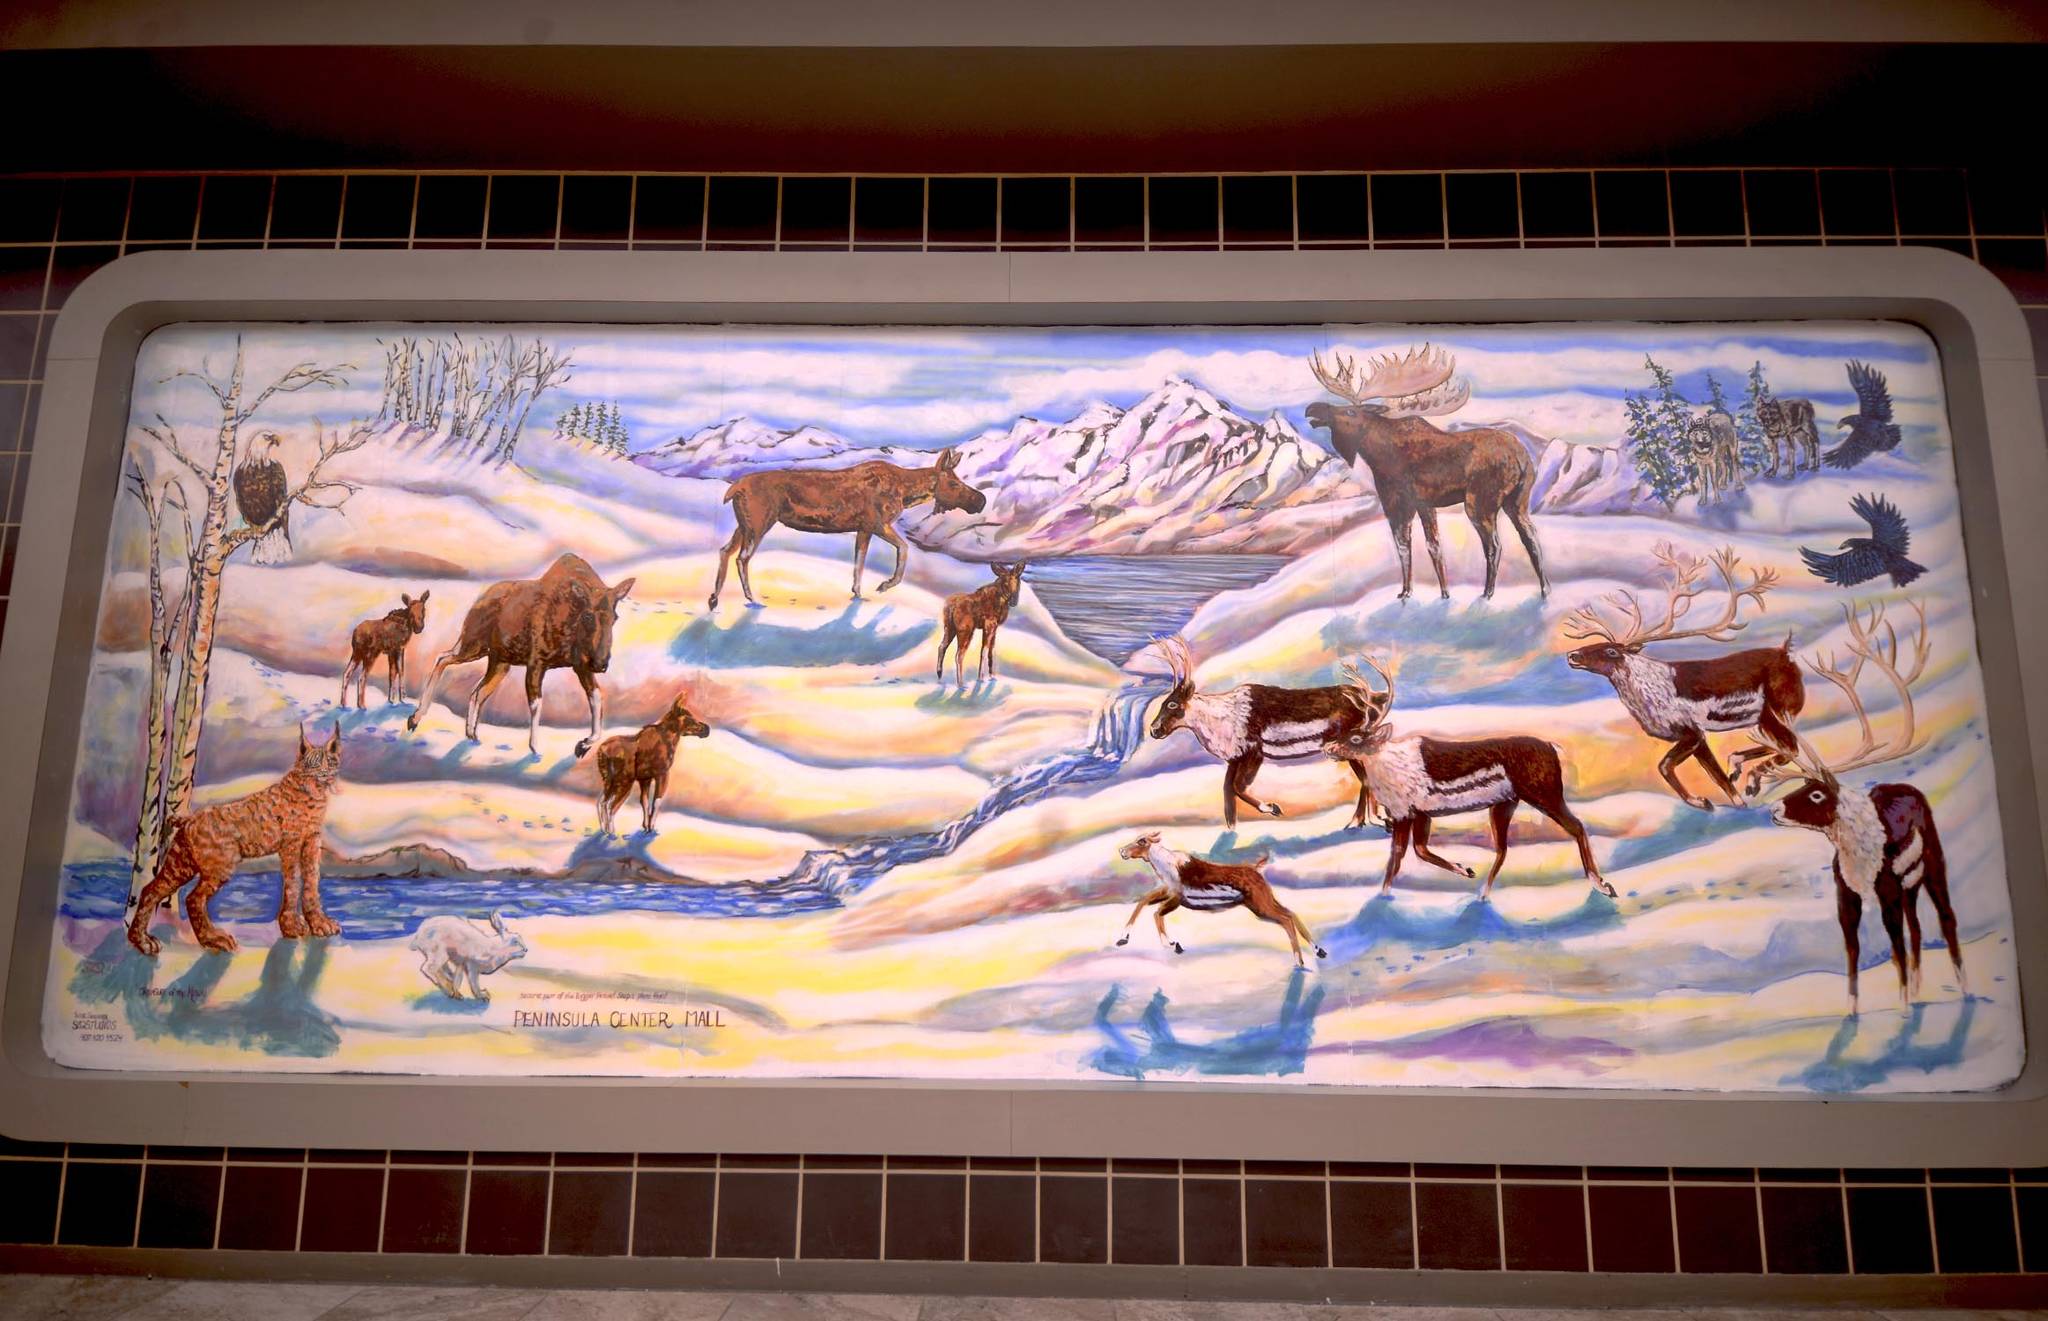 This Tuesday photograph shows the mural that artist Suzie Shrivener finished painting Saturday over a store-front window at the Peninsula Center Mall in Soldotna. Shrivener, who began painting about two years ago after an injury, did the latex paint and airbrushed mural — her first — after setting up a display of her work in the mall’s nearby showcase. She offered the mural to the mall for free to get experience in window painting. “Painting’s relatively new to me, so to work on something that big, I didn’t know how it would turn out,” Shrivener said. “I didn’t know what would happen, but I thought it was a good opportunity.” (Photo by Ben Boettger/Peninsula Clarion)